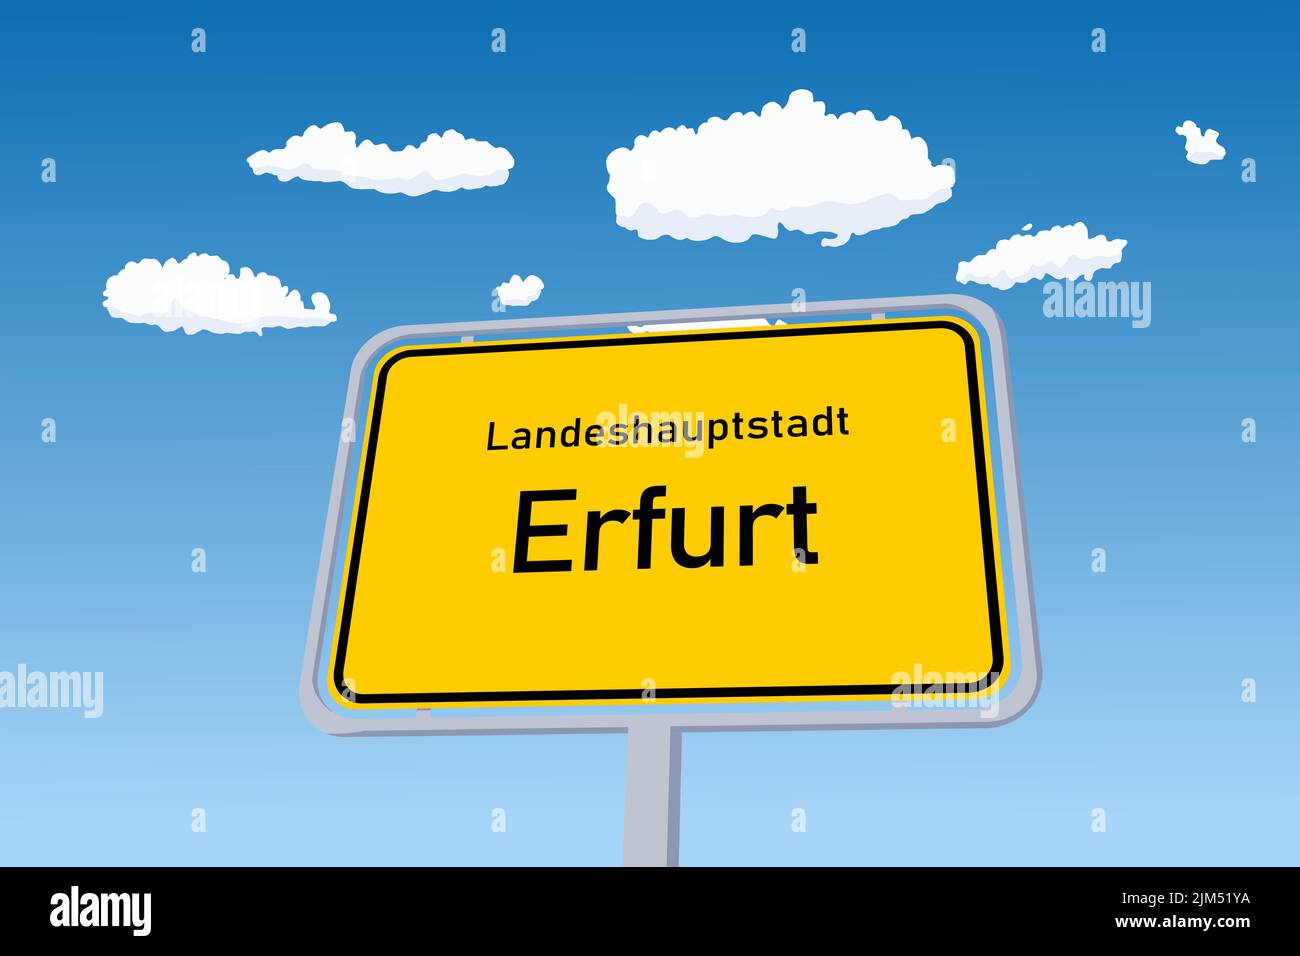 Erfurt city sign in Germany. City limit welcome road sign. Landeshauptstadt means State Capital in German language. Stock Vector